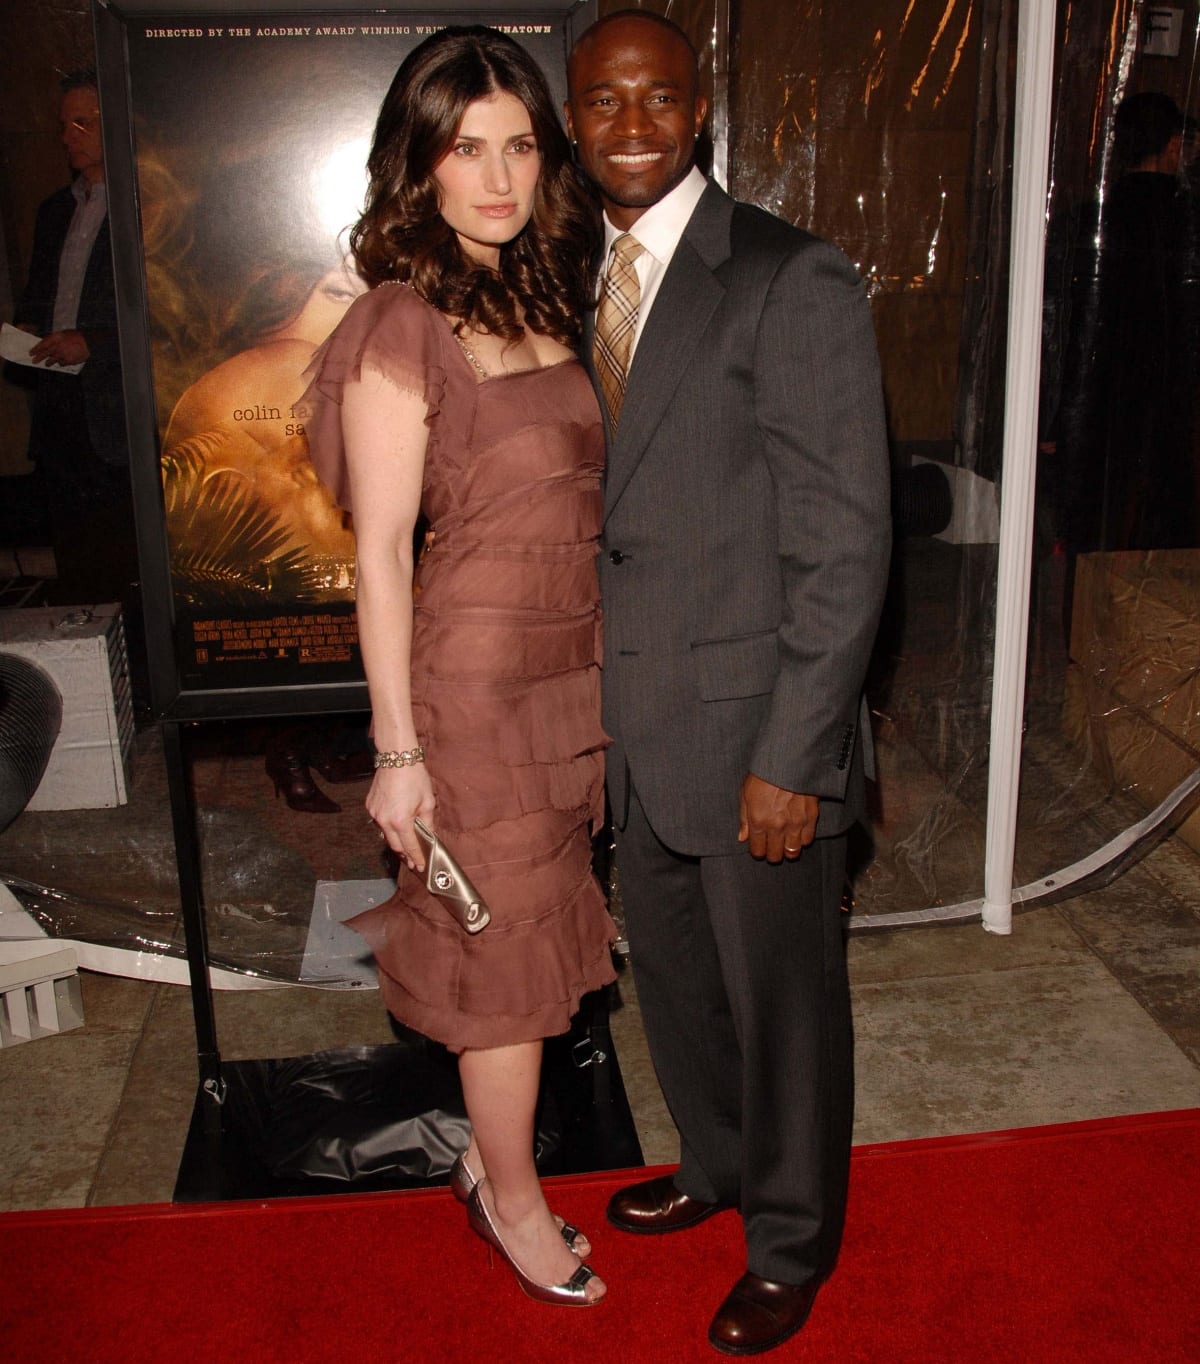 Idina Menzel and Taye Diggs attending the Los Angeles premiere of Ask the Dust